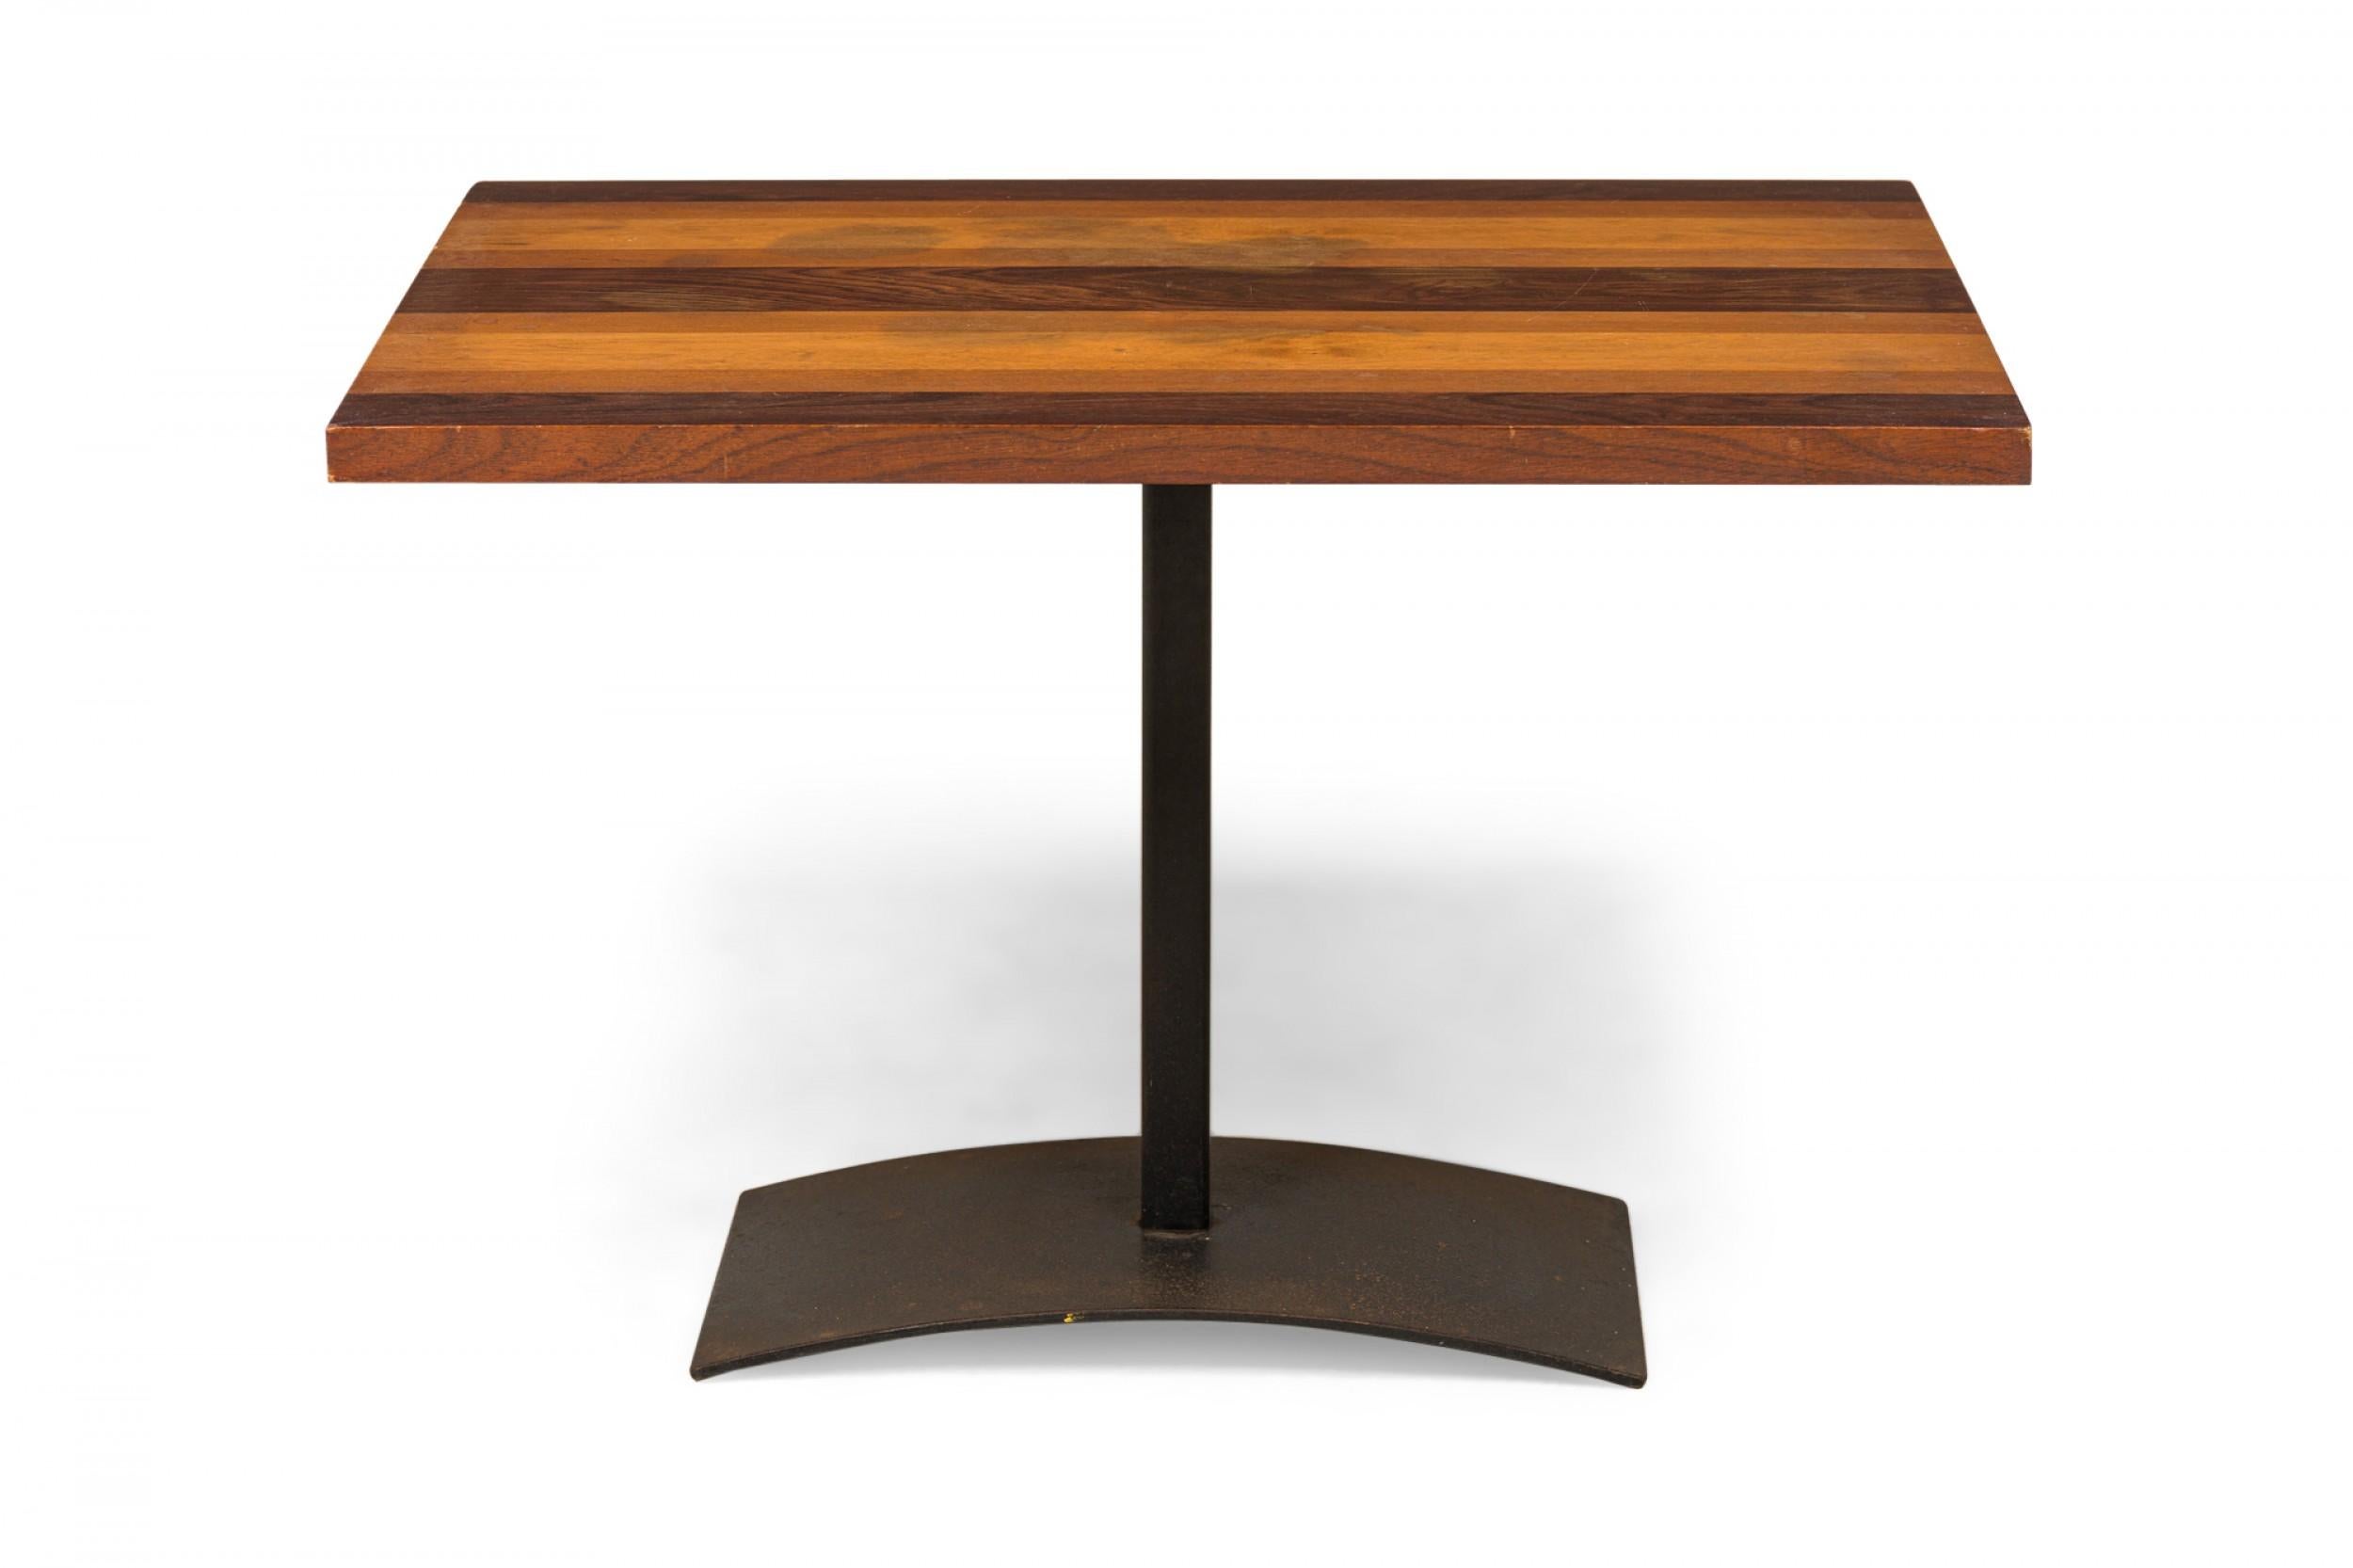 American Mid-Century rectangular end / side table with a tri-tone rectangular wooden top resting on an iron pedestal base with a domed rectangular foot. (MILO BAUGHMAN FOR THAYER COGGIN)
